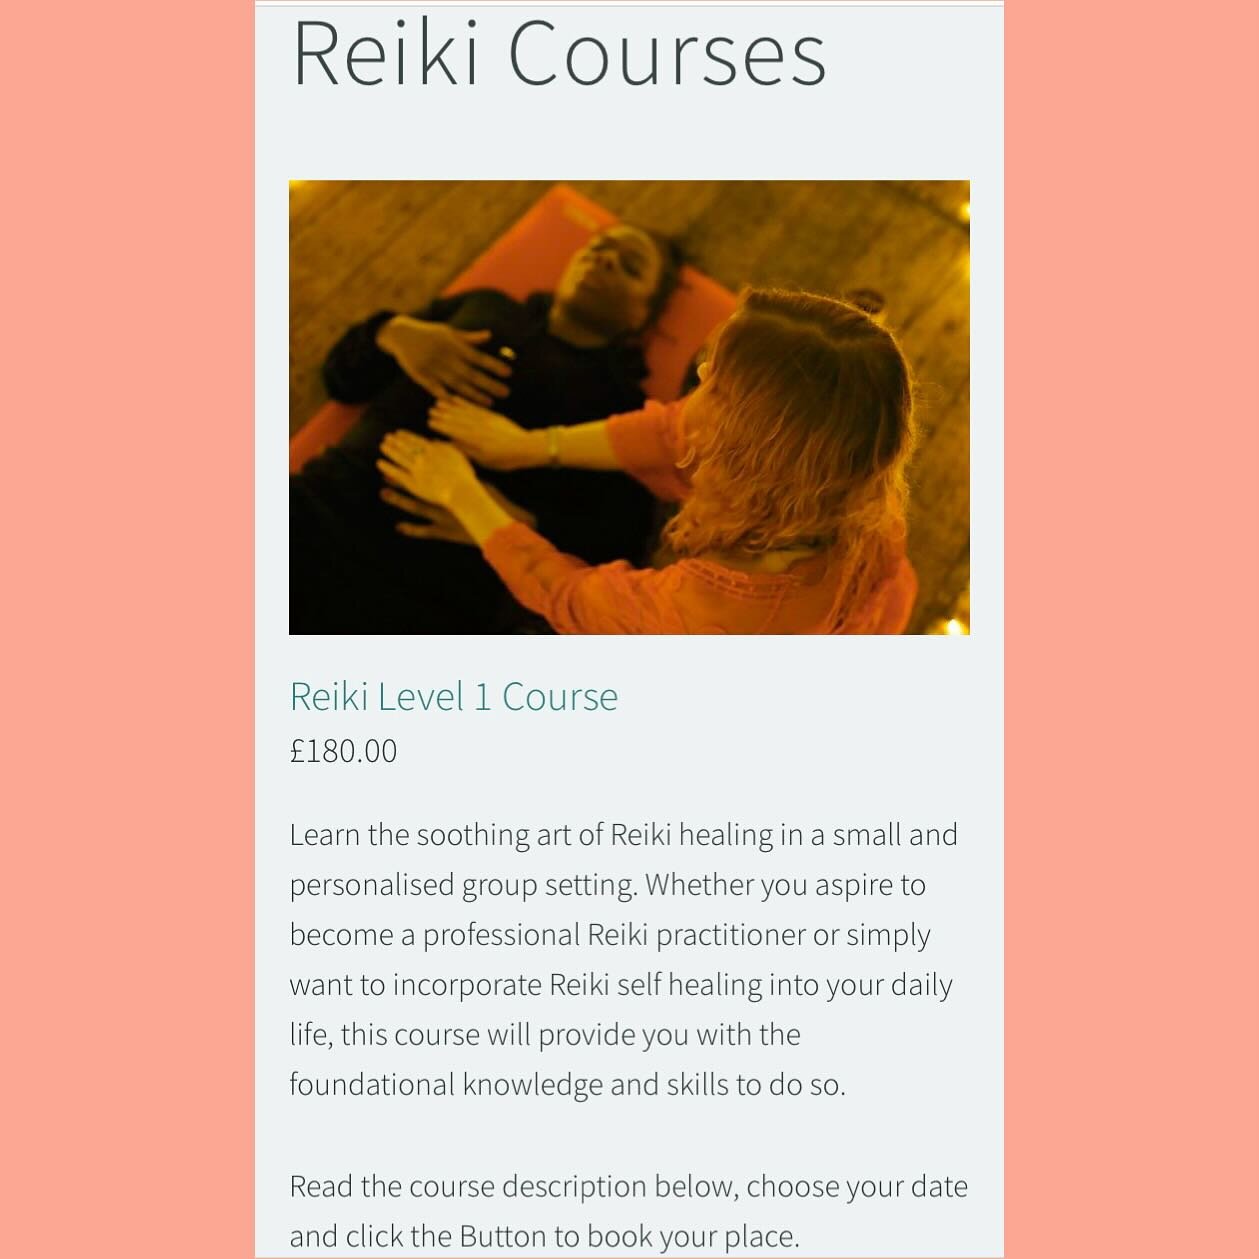 REIKI LEVEL 1 COURSES open for booking! 🙌 
&bull;
You can now learn the soothing art of Reiki healing in a small and personalised group setting. Whether you aspire to become a professional Reiki practitioner or simply want to incorporate Reiki self 